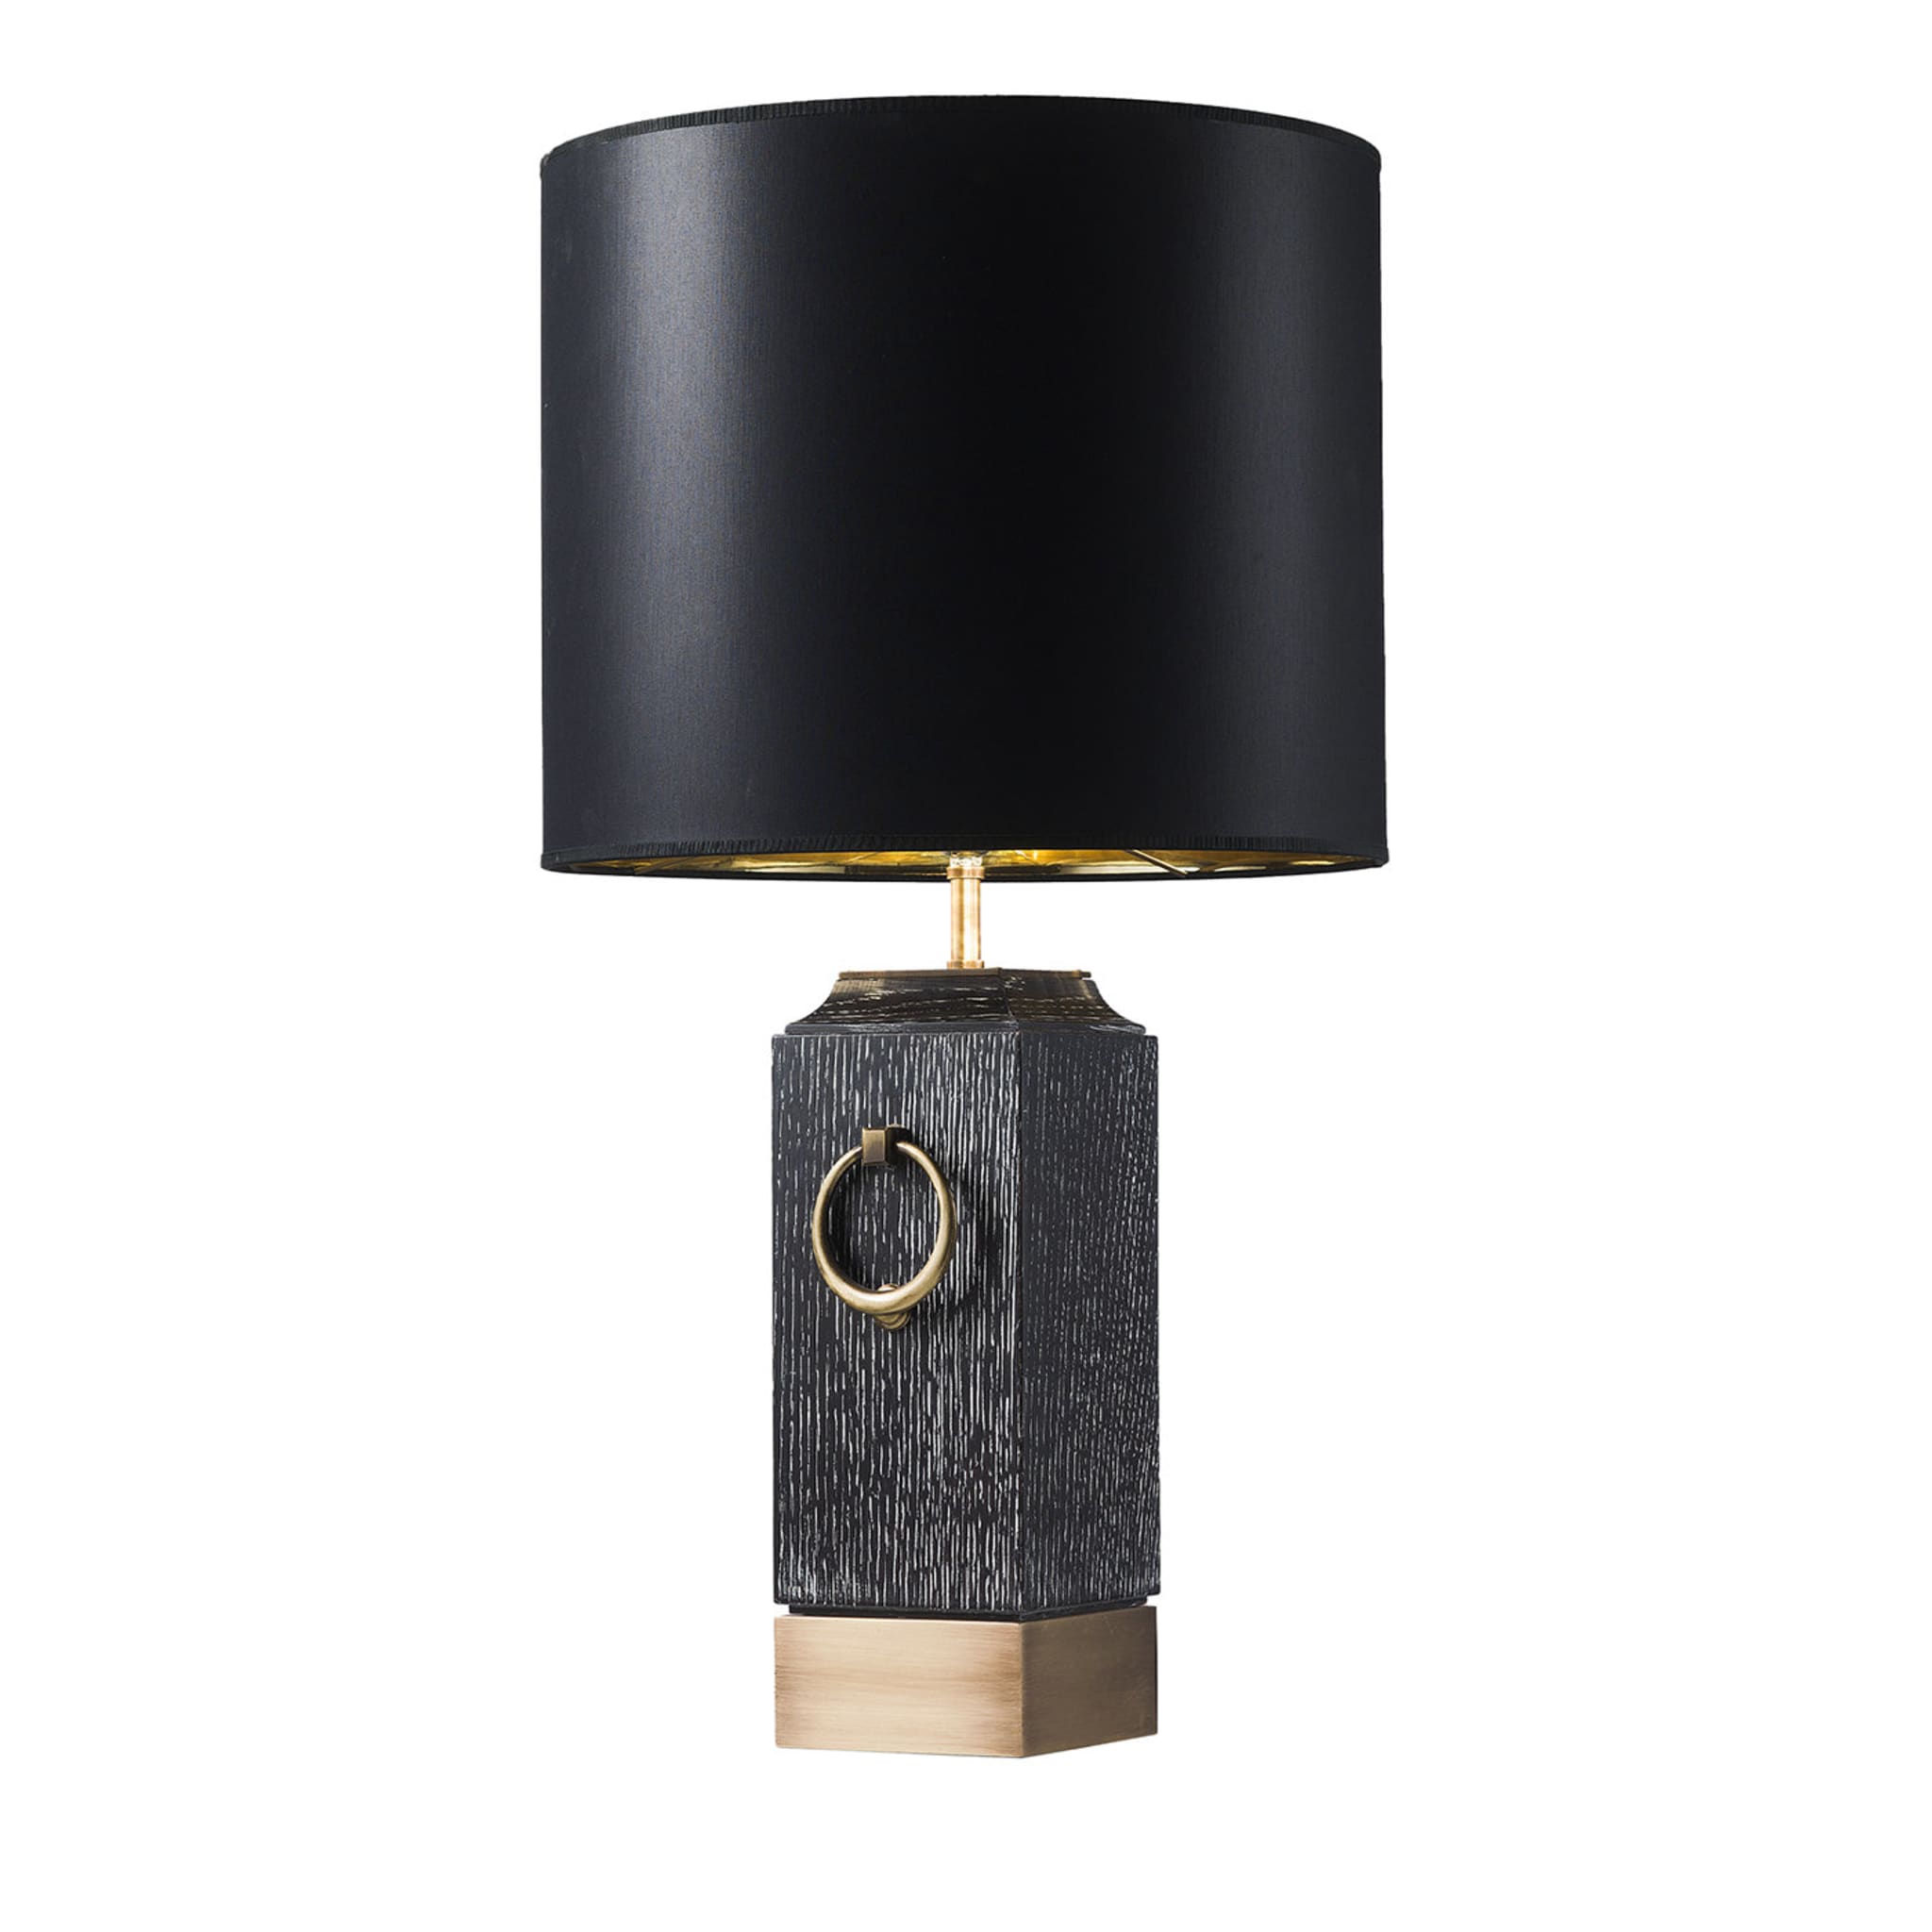 Durmast Table Lamp with Rings by Michele Bonan - Main view